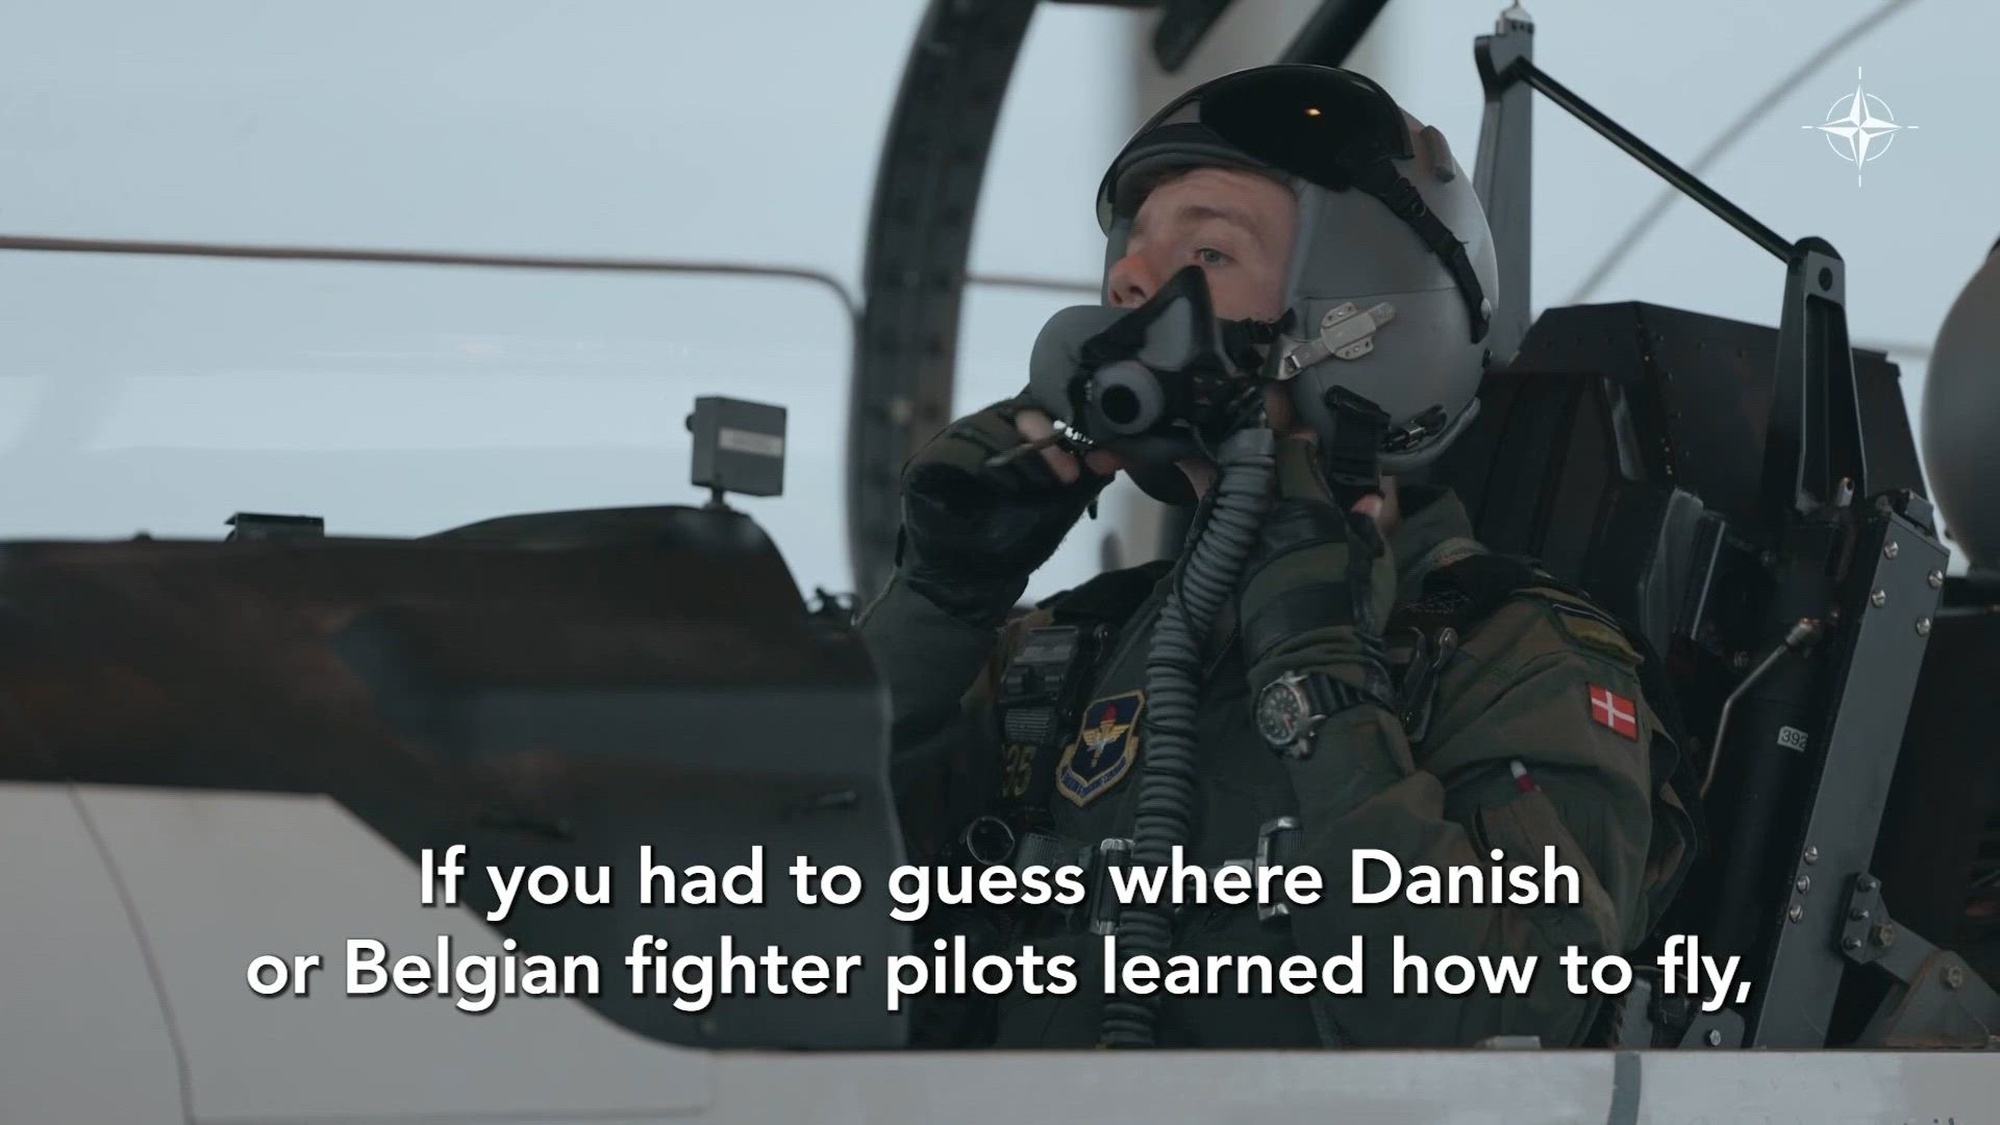 For many of NATO’s aspiring fighter pilots, the journey begins in Texas, where the Euro-NATO Joint Jet Pilot Training programme churns out the next generation of Allied aviators.

SYNOPSIS
There’s something that fighter pilots from Belgium, Denmark, Germany and 11 other NATO Allies have in common: their flying careers started in Texas, USA.
That’s where the Euro-NATO Joint Jet Pilot Training (ENJJPT) programme has been training pilots since the early 80s, when a number of countries decided to found the programme at Sheppard Air Force Base. While conceived of as a cost-saving measure, giving Allies the chance to pool resources in the resource-intensive task of training new fighter pilots, this training has since become a place for students and instructors to pass on tactics and form multinational relationships that will span their careers. Allies contributing to this training are Belgium, Canada, Denmark, Germany, Greece, Italy, the Netherlands, Norway, Portugal, Romania, Spain, Türkiye, the United Kingdom and the United States.

Throughout the course, students learn the fundamentals of flight, progressing from ground school to the prop-driven T-6 Texan trainer - and finally to the T-38 Talon, a supersonic jet trainer that prepares them for the physical and mental strain of flying tactical aircraft. With 12-hour working days and plenty of bookwork to supplement the flying, this course ensures that only the most skilled and most dedicated graduates serve as fighter pilots in their country’s air forces.

This video follows Royal Danish Air Force Lieutenant ”Bun” and Belgian Air Force Lieutenant Jade. Having since completed the programme, ‘Bun’ is now training to fly C-130 Hercules transport aircraft, while Jade is preparing to fly the F-16 Fighting Falcon. Future generations of Belgian pilots will also have the chance to fly the F-35 Lightning II, as Belgium is in the process of adding these assets to its fleet. The first F-35A jet will enter service at Luke Ai